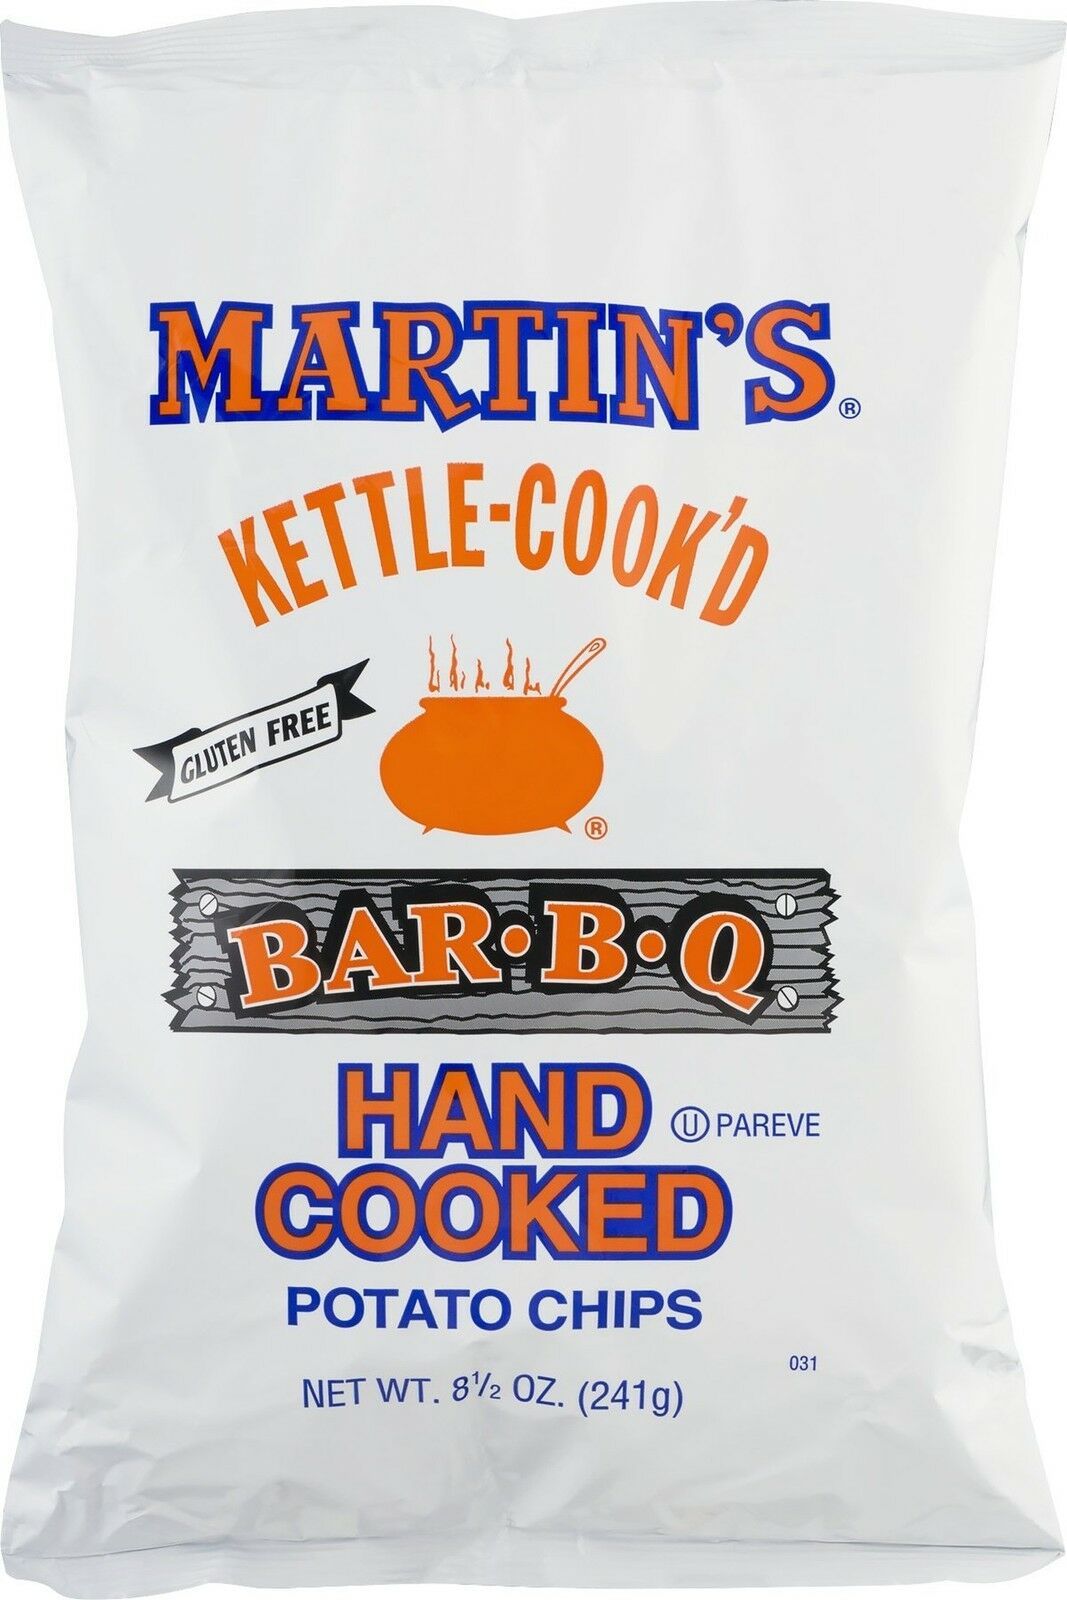 Primary image for Martin's Kettle Cook'd Bar-B-Q BBQ Potato Chips- Four 8.5 oz. Bags